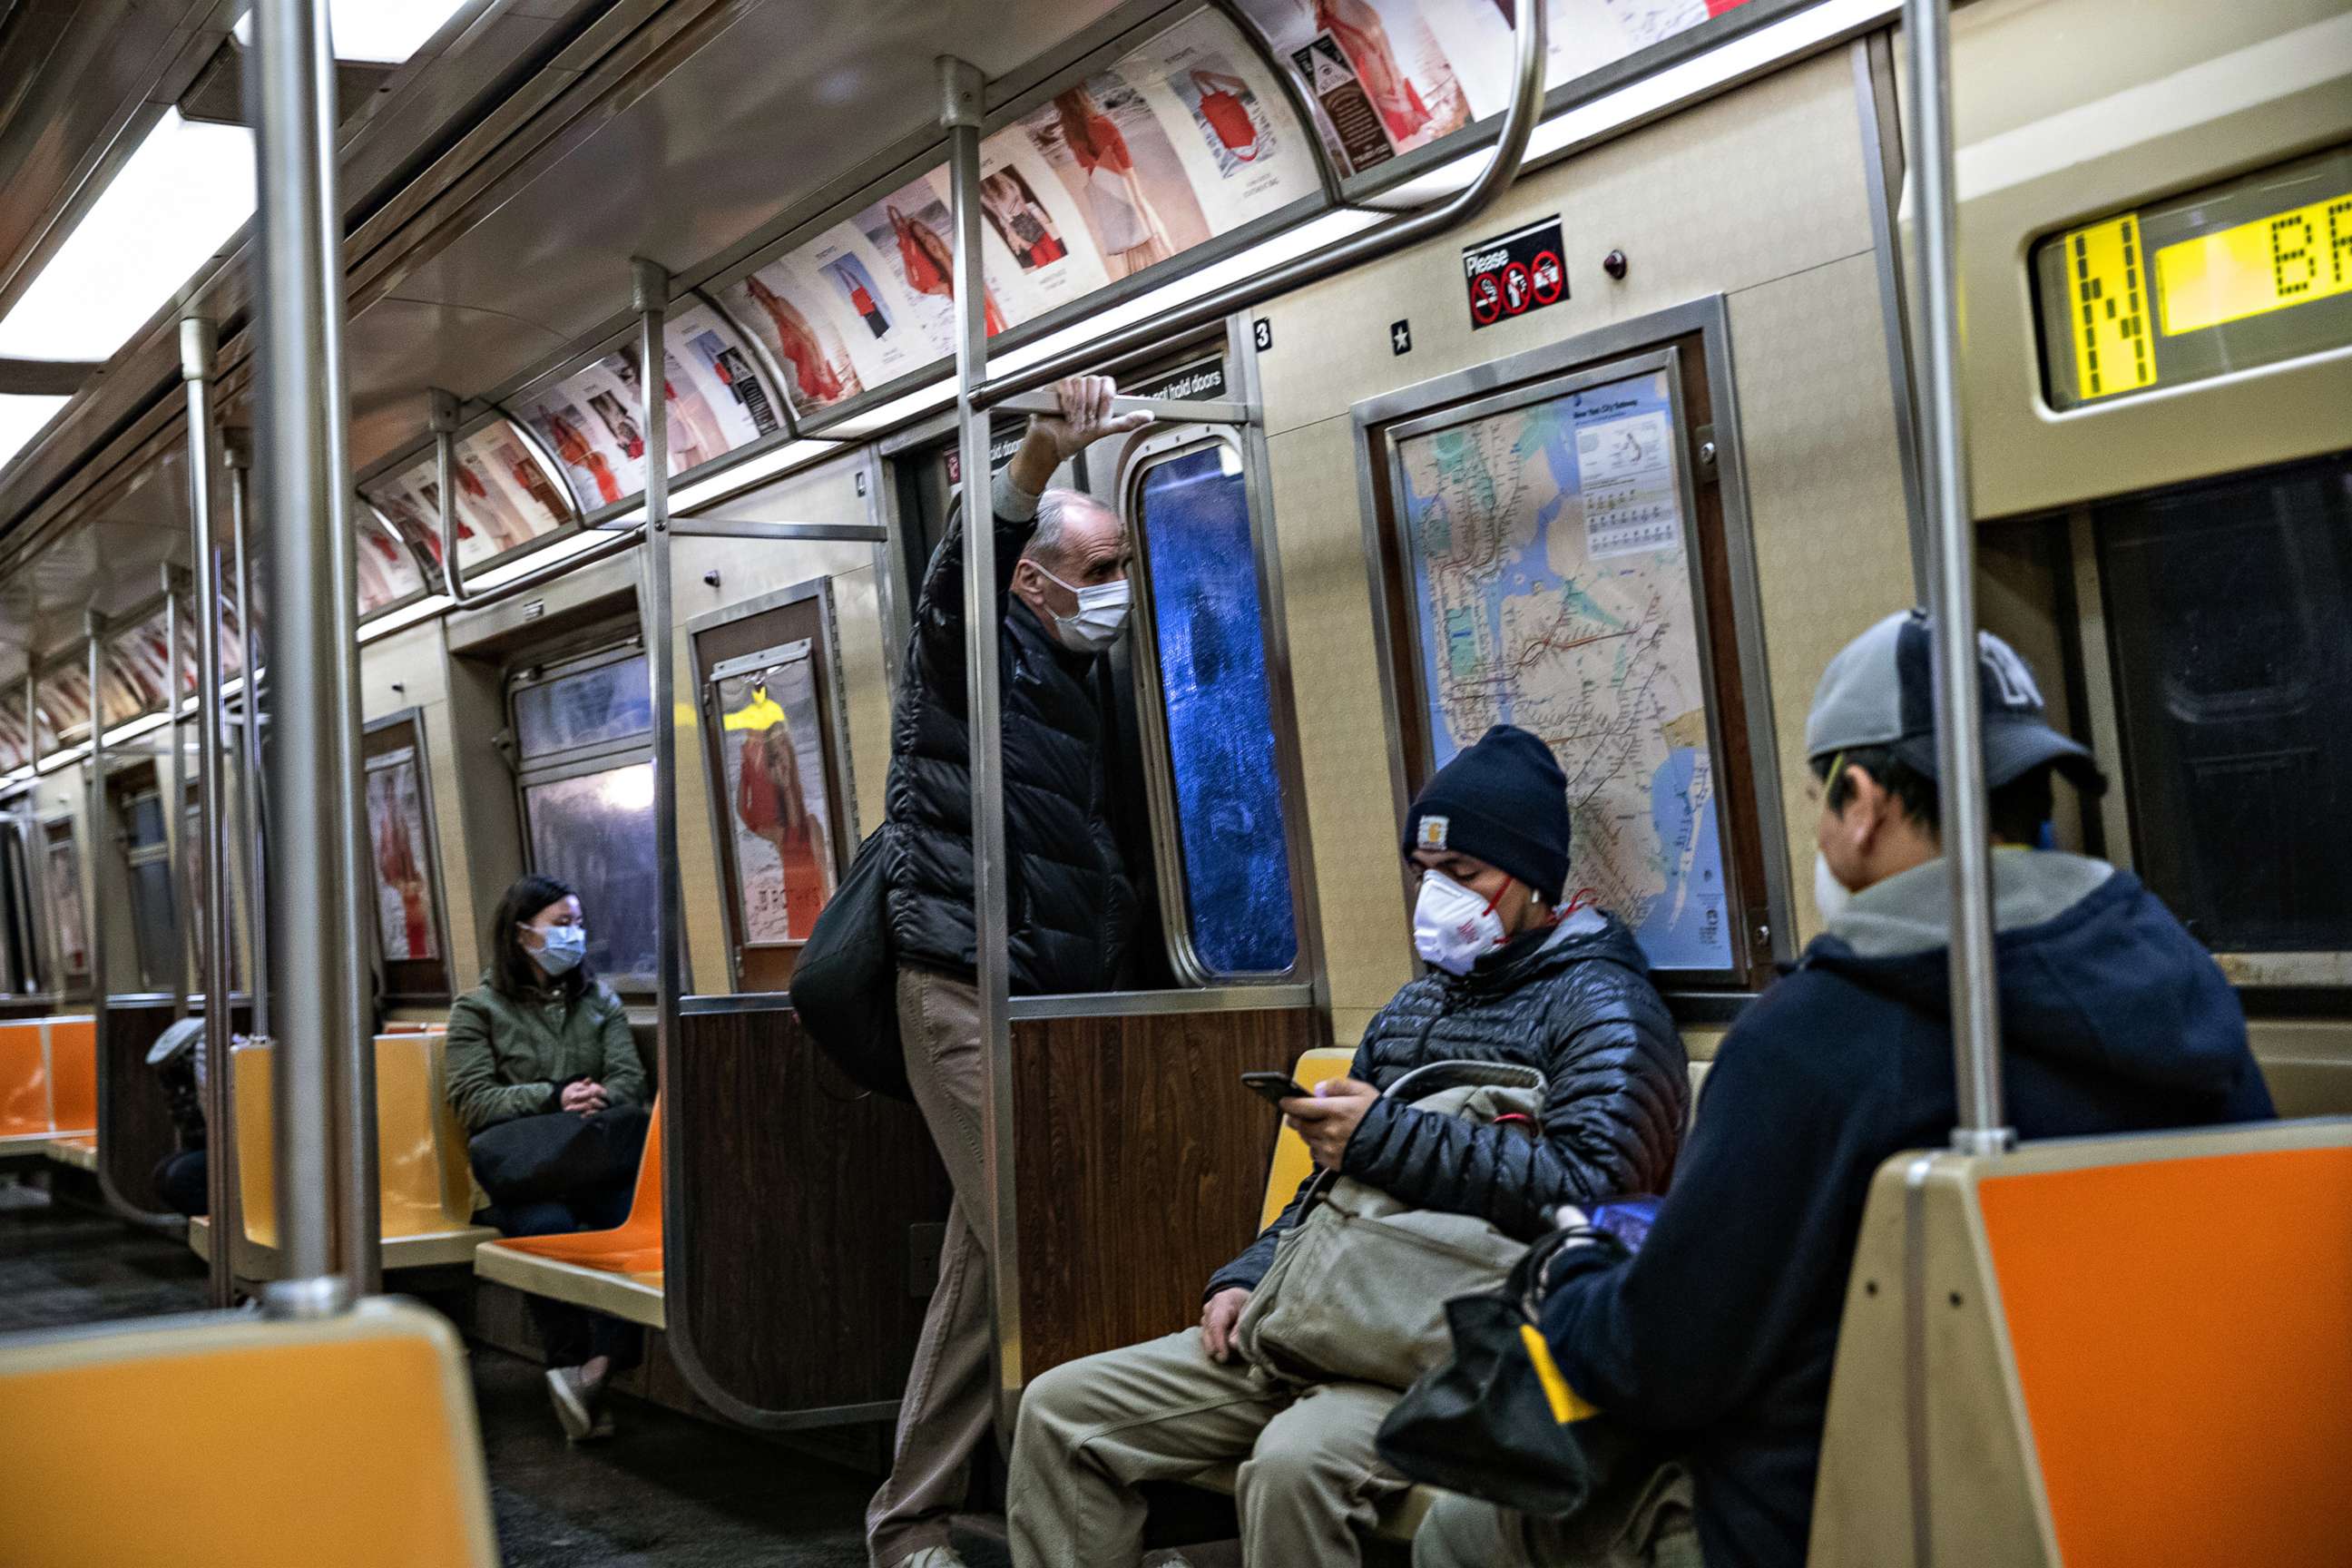 PHOTO: Passengers wearing face masks ride the subway, on April 28, 2020, in New York City.